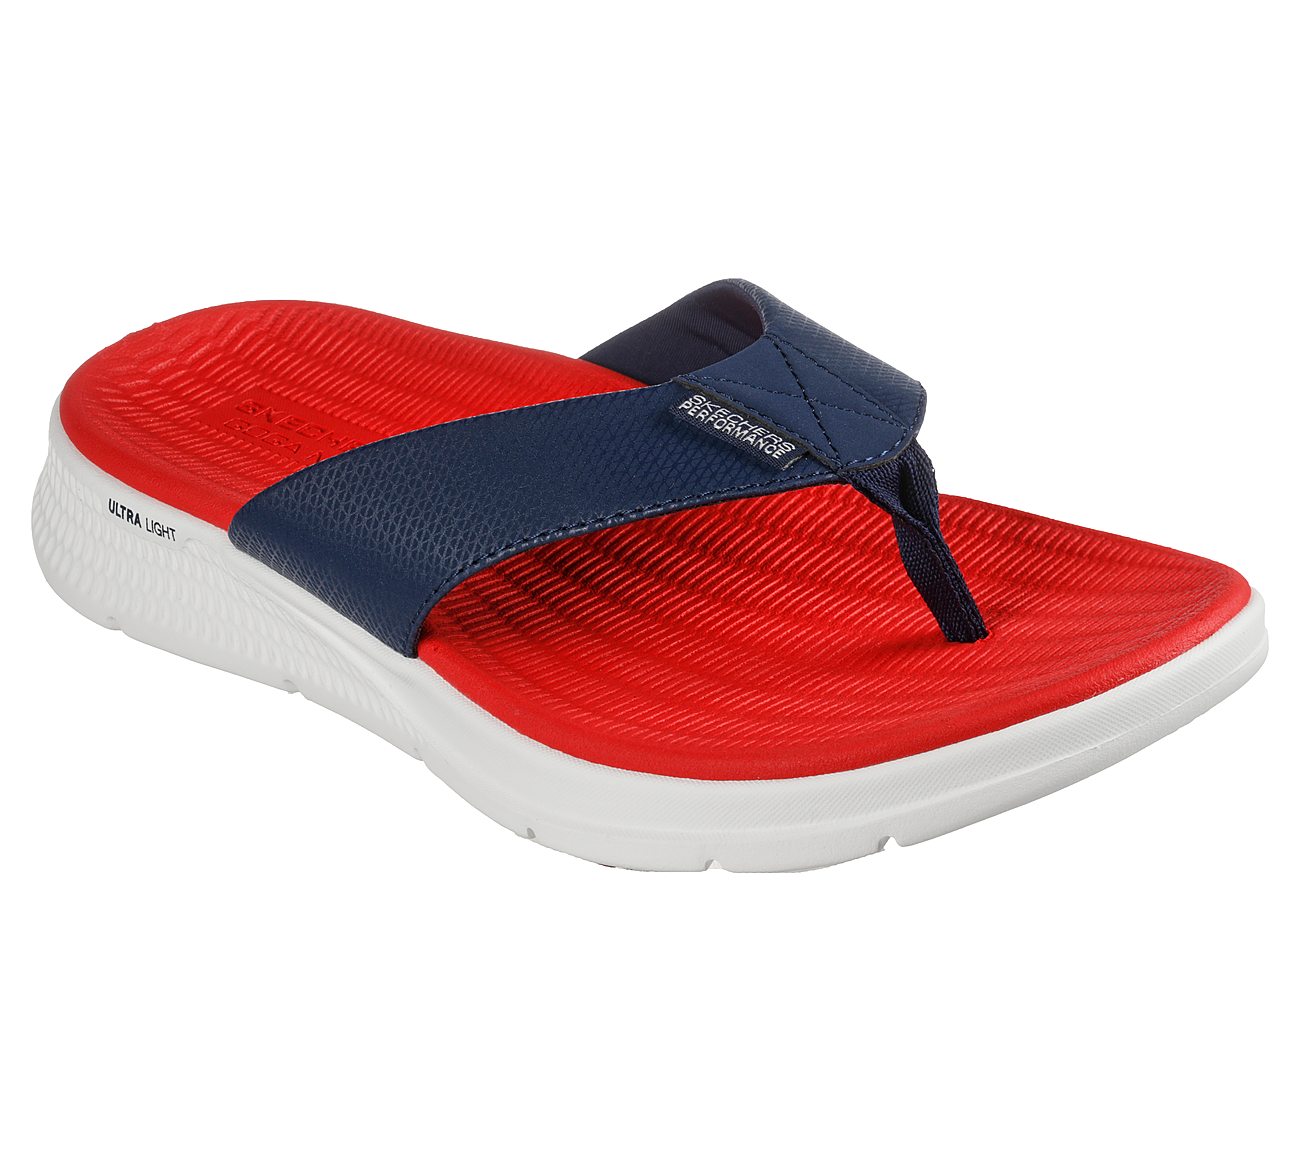 GO CONSISTENT SANDAL-SYNTHWAV, Navy image number null